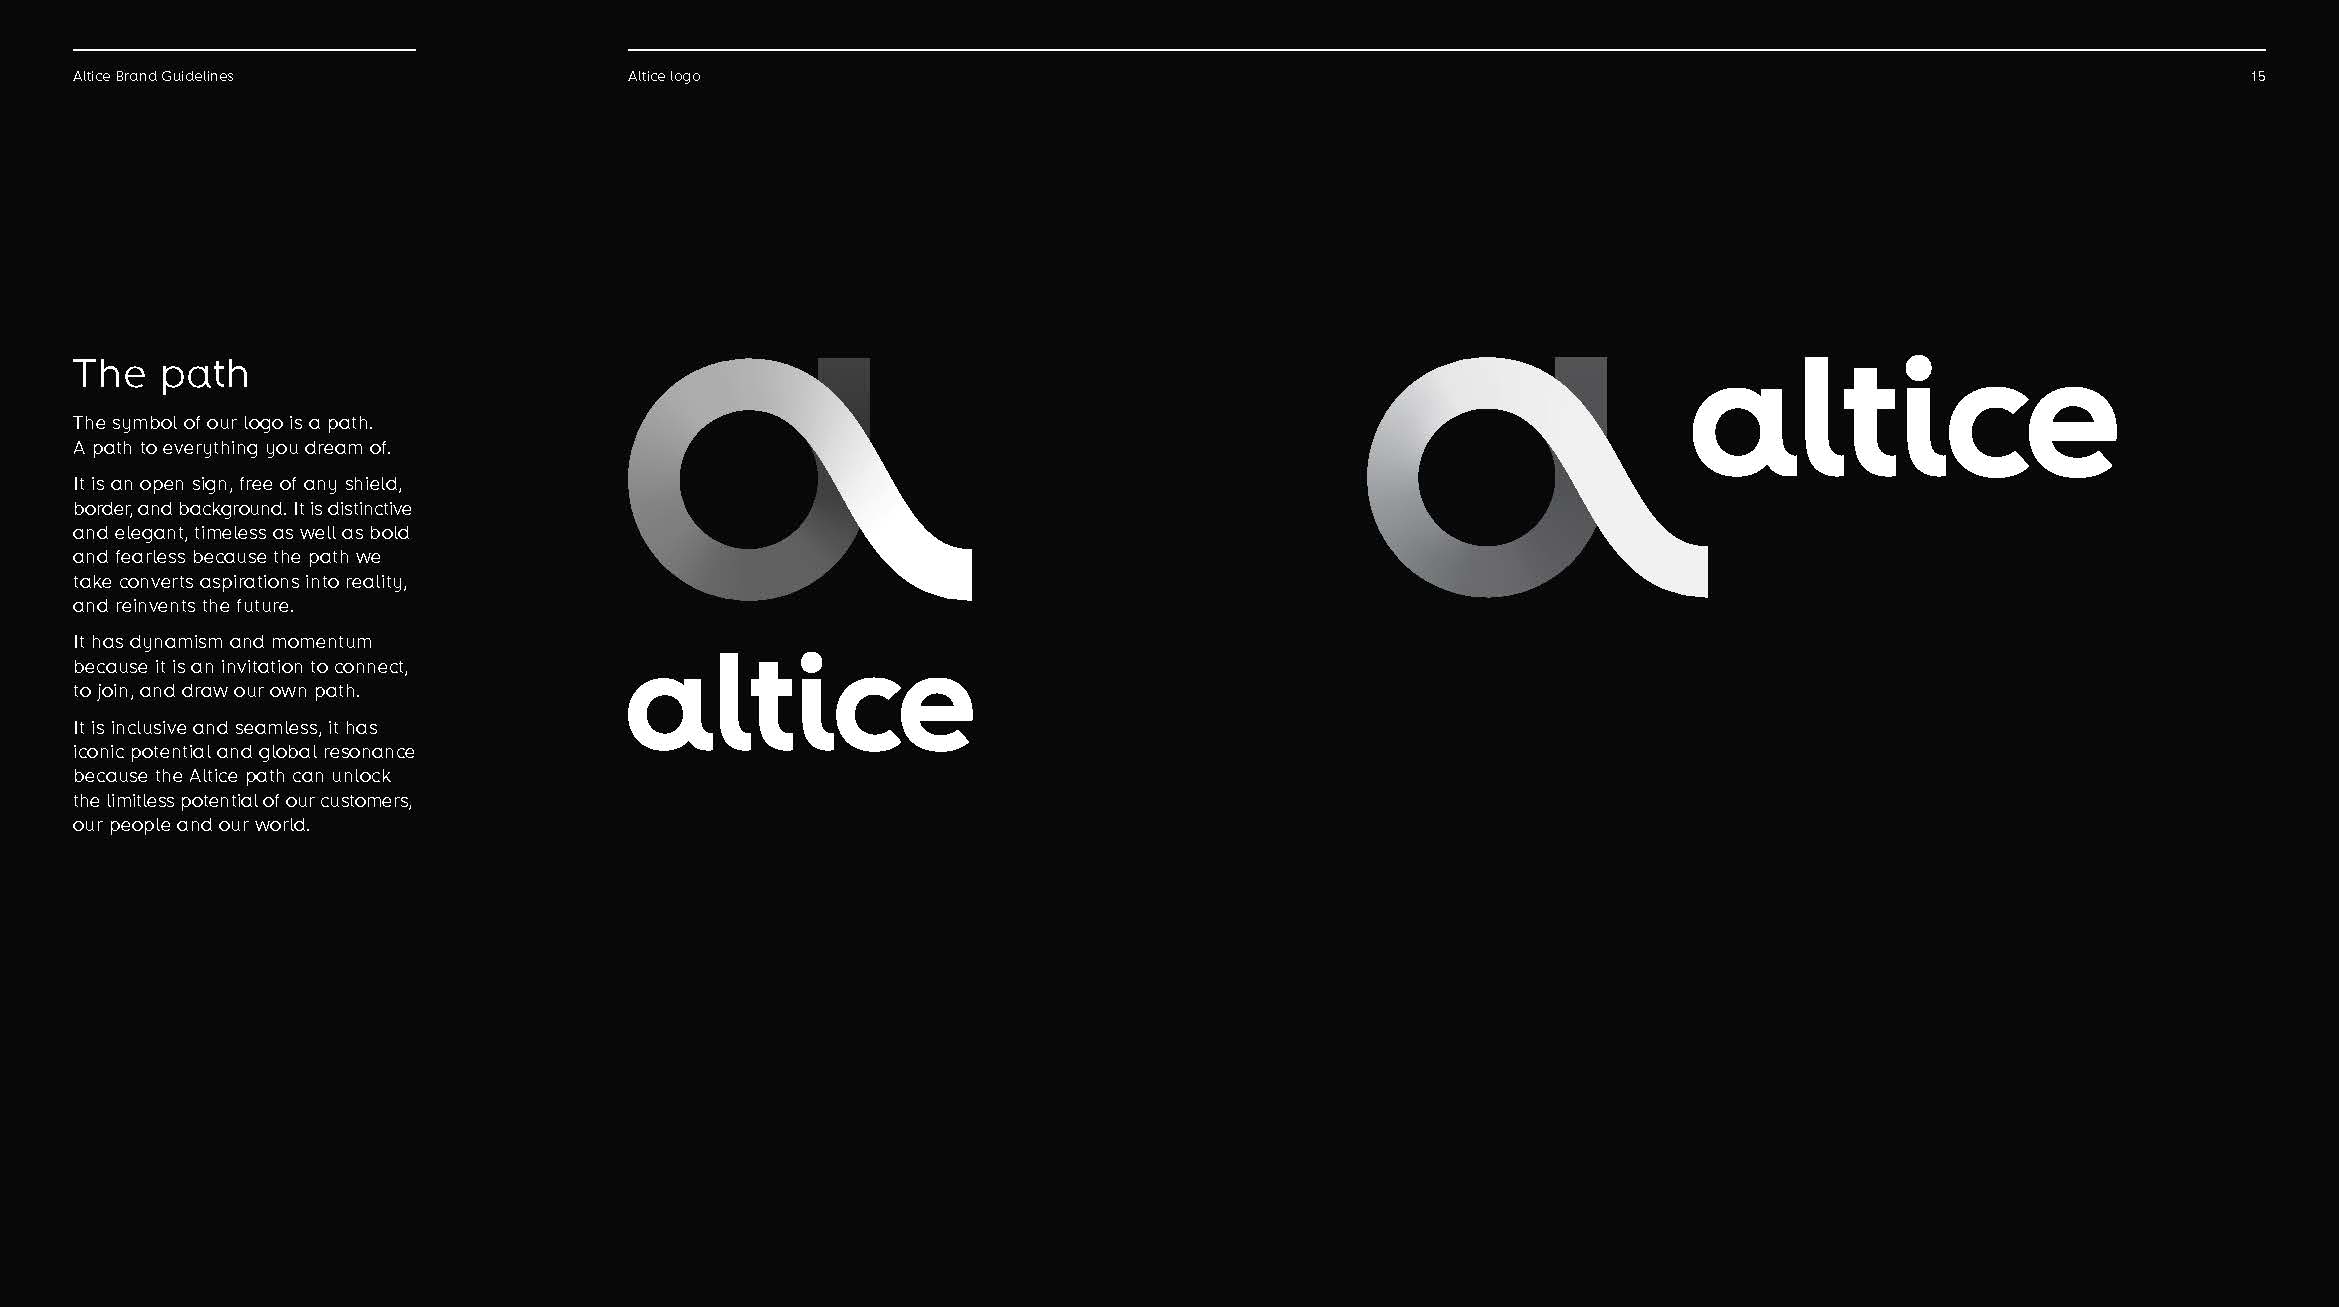 Pages from 170908_altice_iv_brand_guidelines_Page_01.jpg